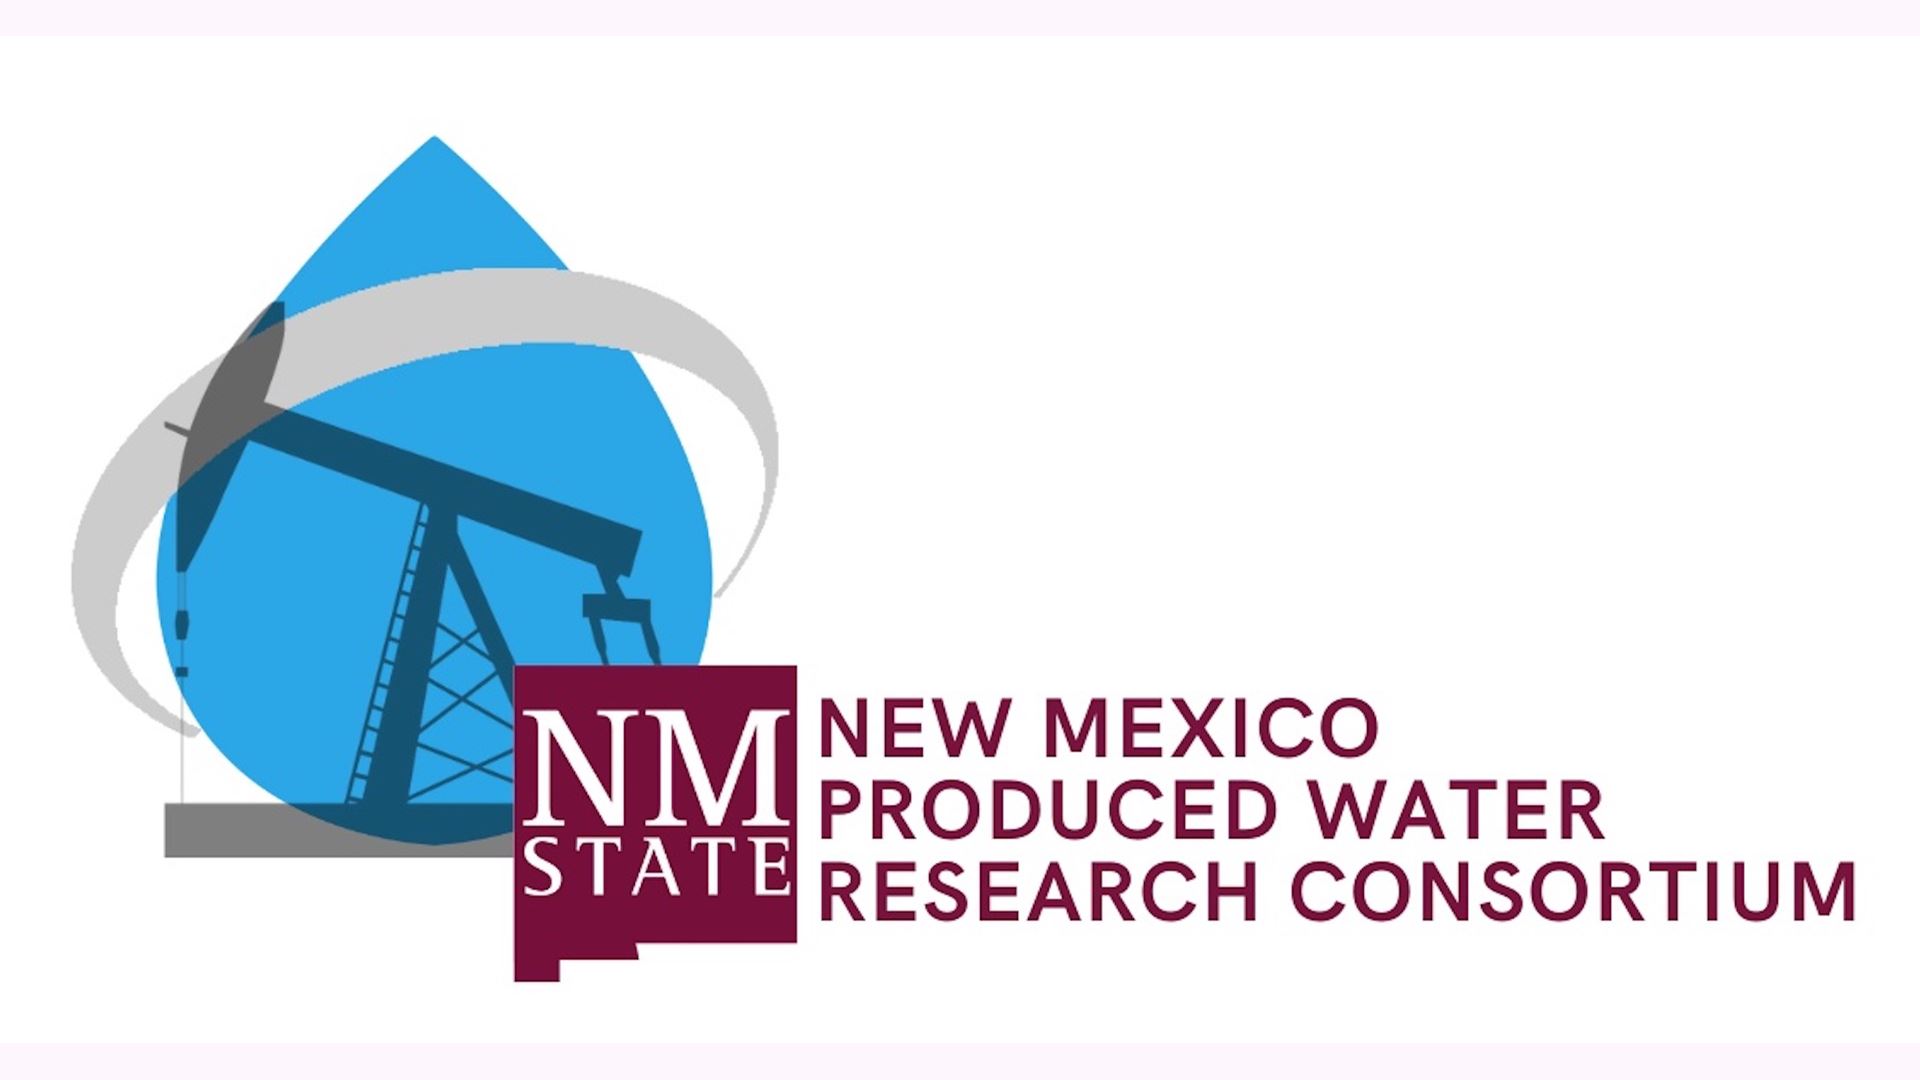 NM Produced Water Research Consortium to host public information sessions in Hobbs